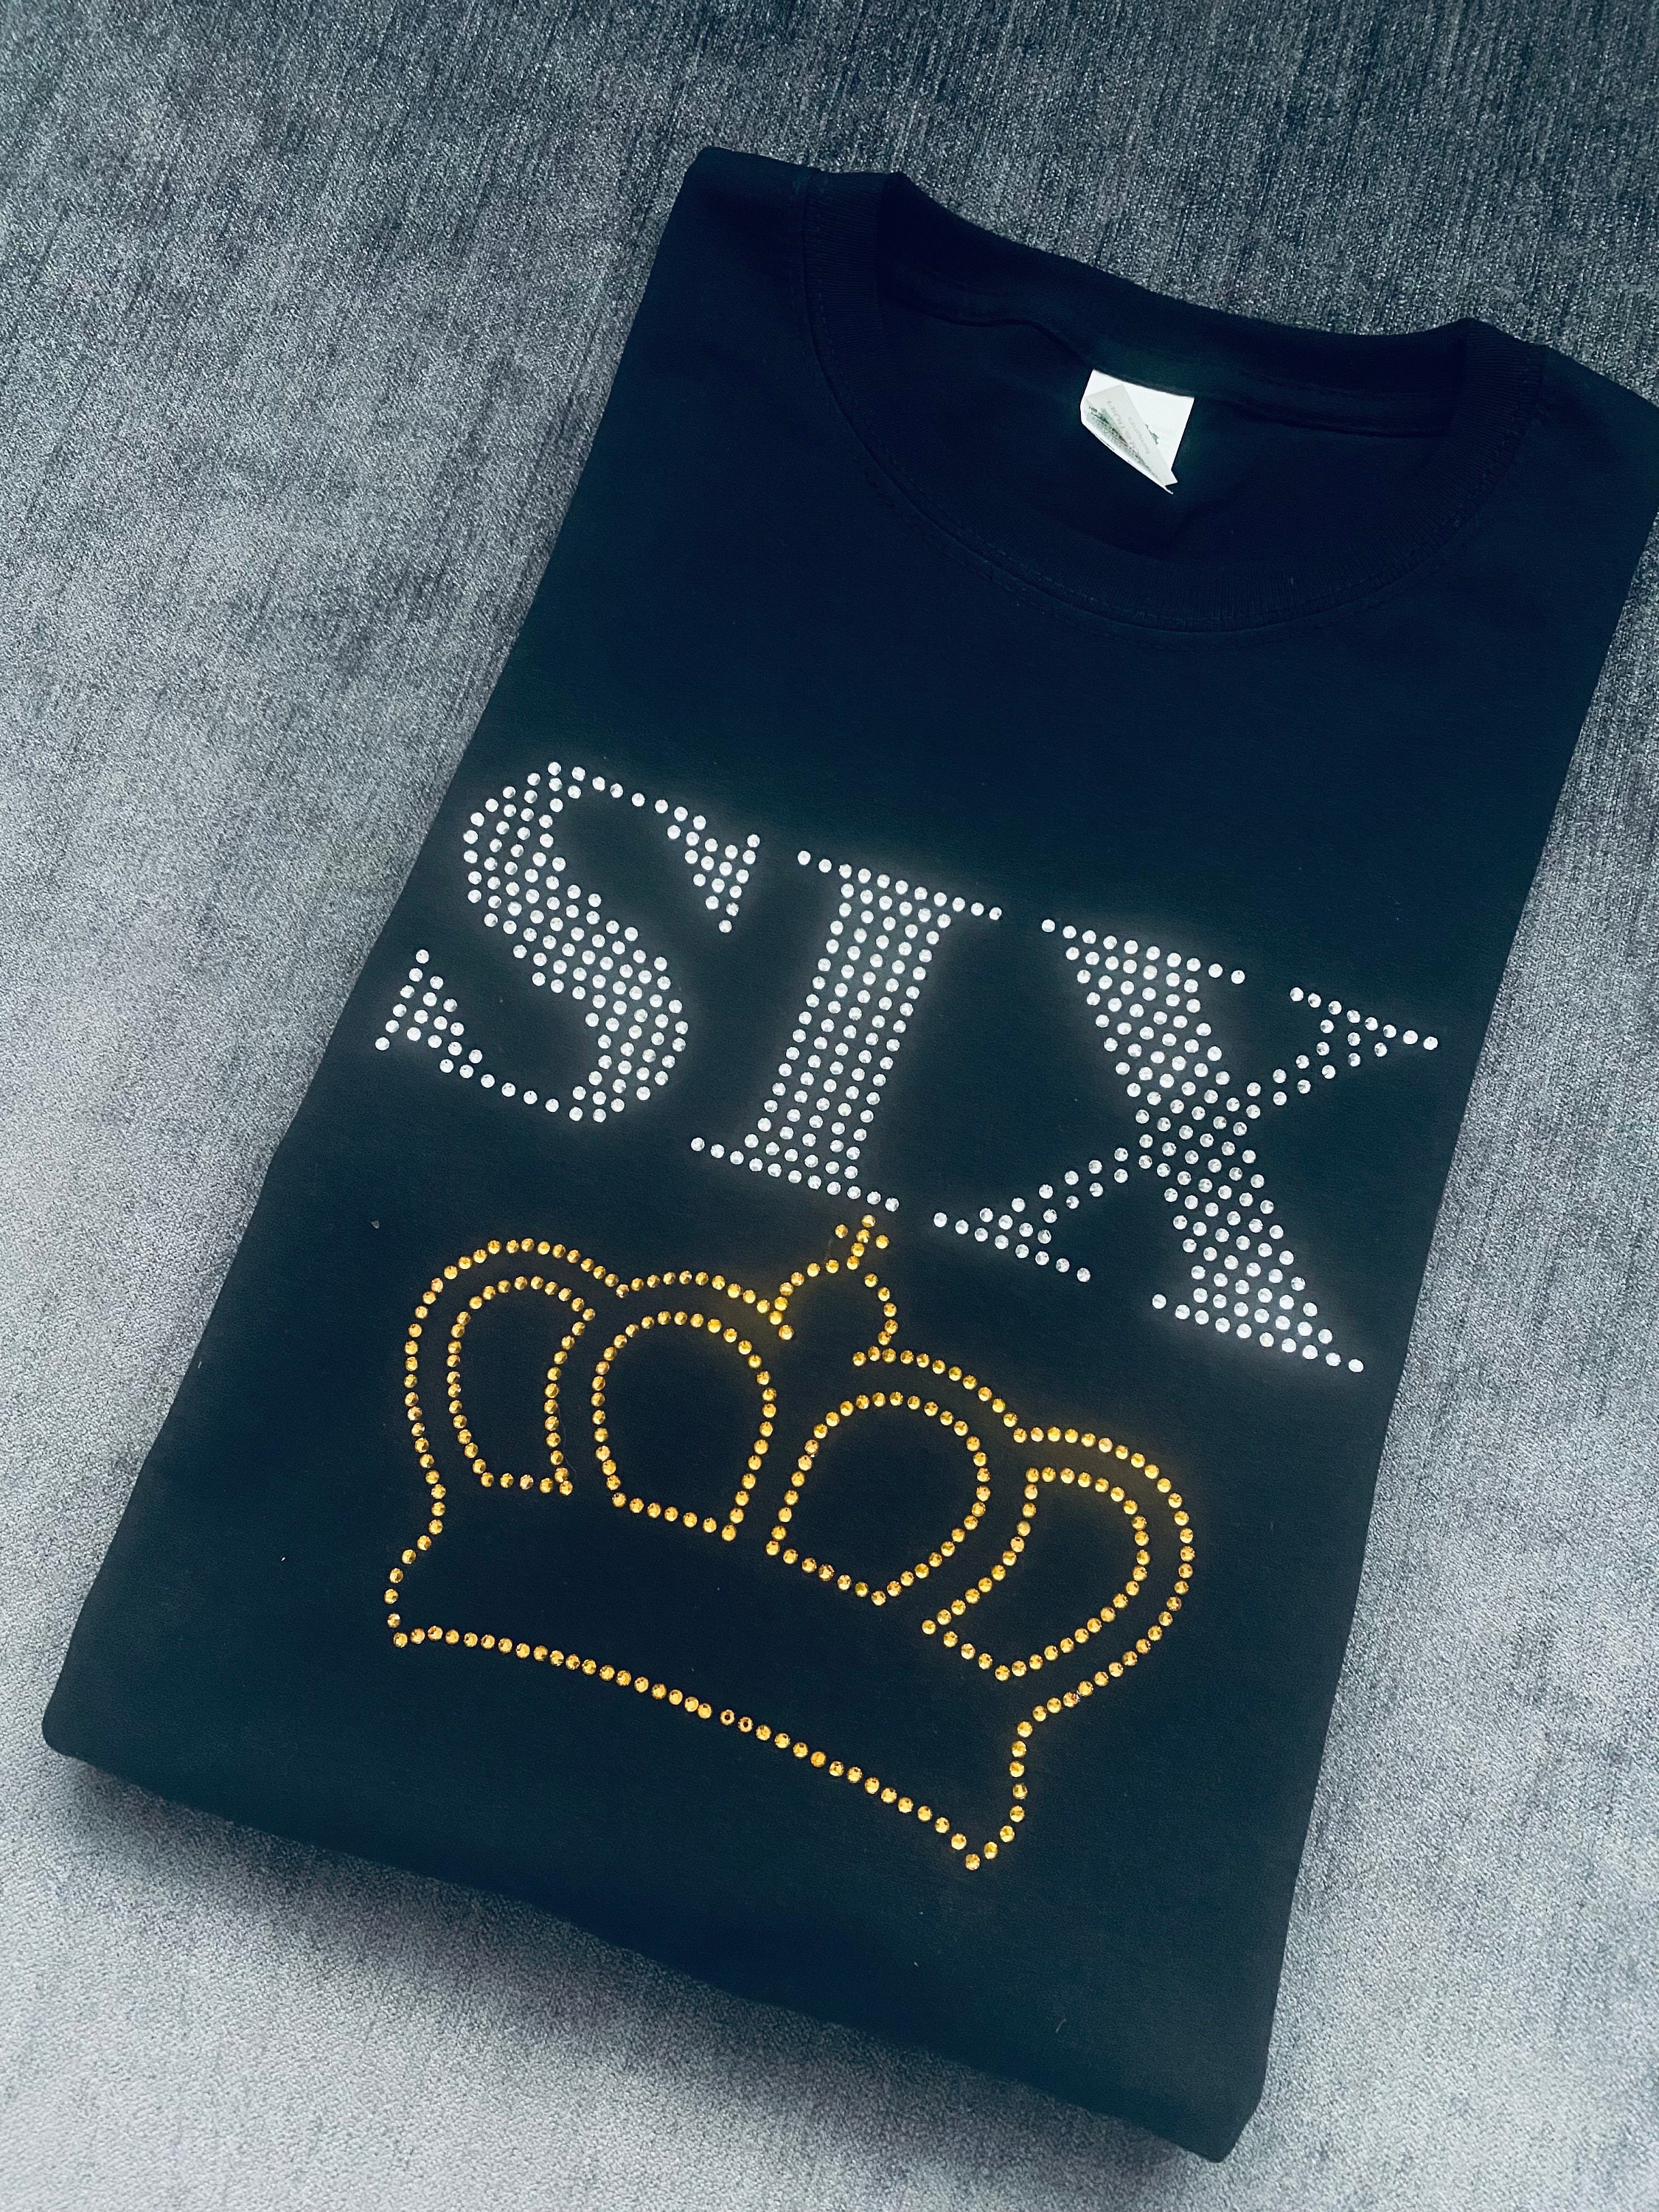 Blingitmerch Sorry Not Sorry Six The Musical Shirt, Theatre Kid Gifts, Six Cosplay, Birthday Gift for Girls, Dance T Shirt, Theatre Ticket Gift